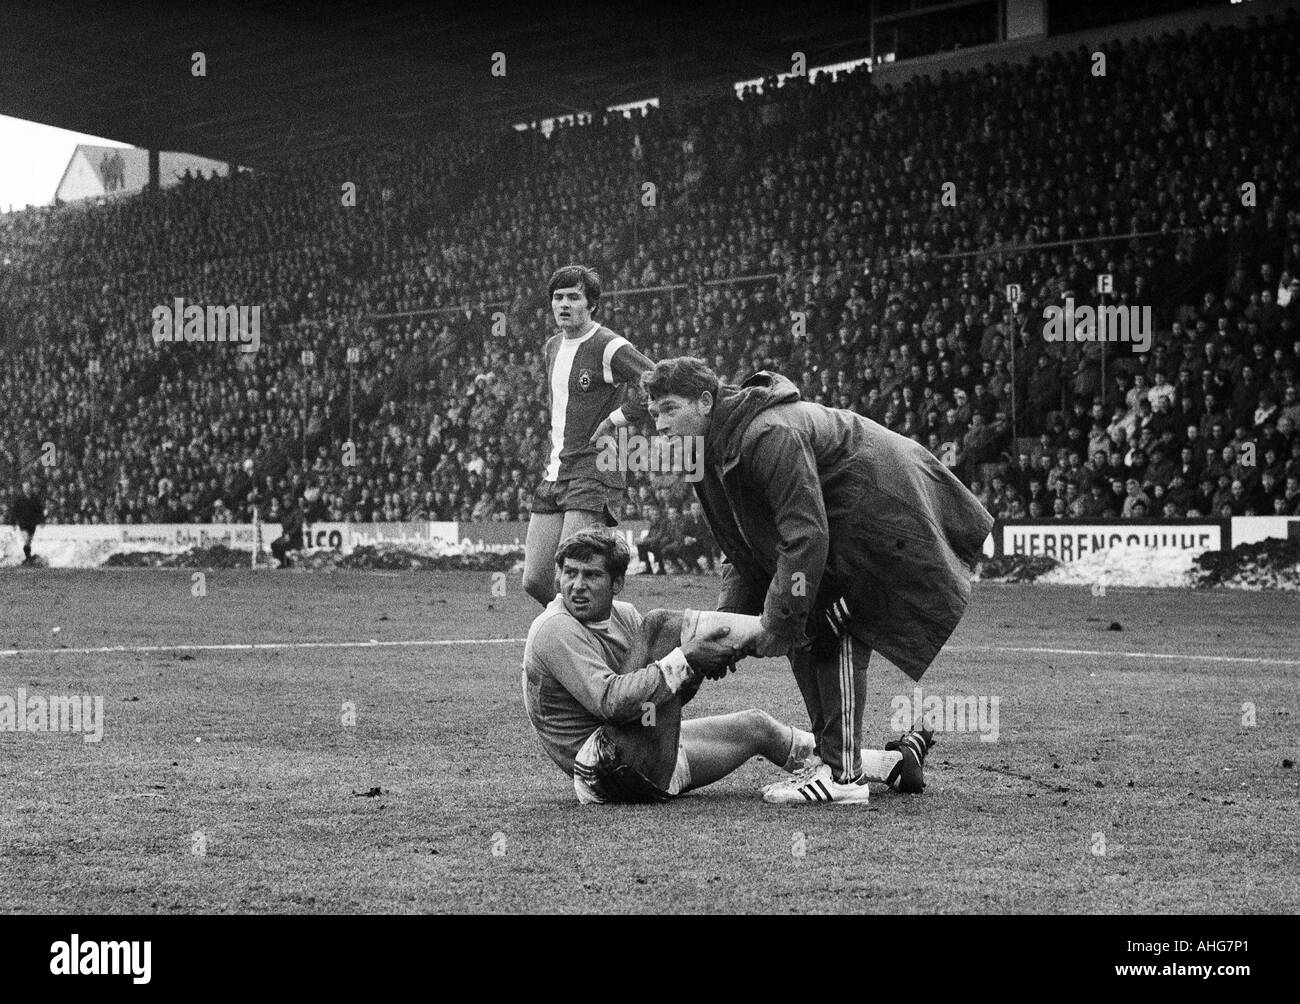 1860 munich Black and White Stock Photos & Images - Alamy